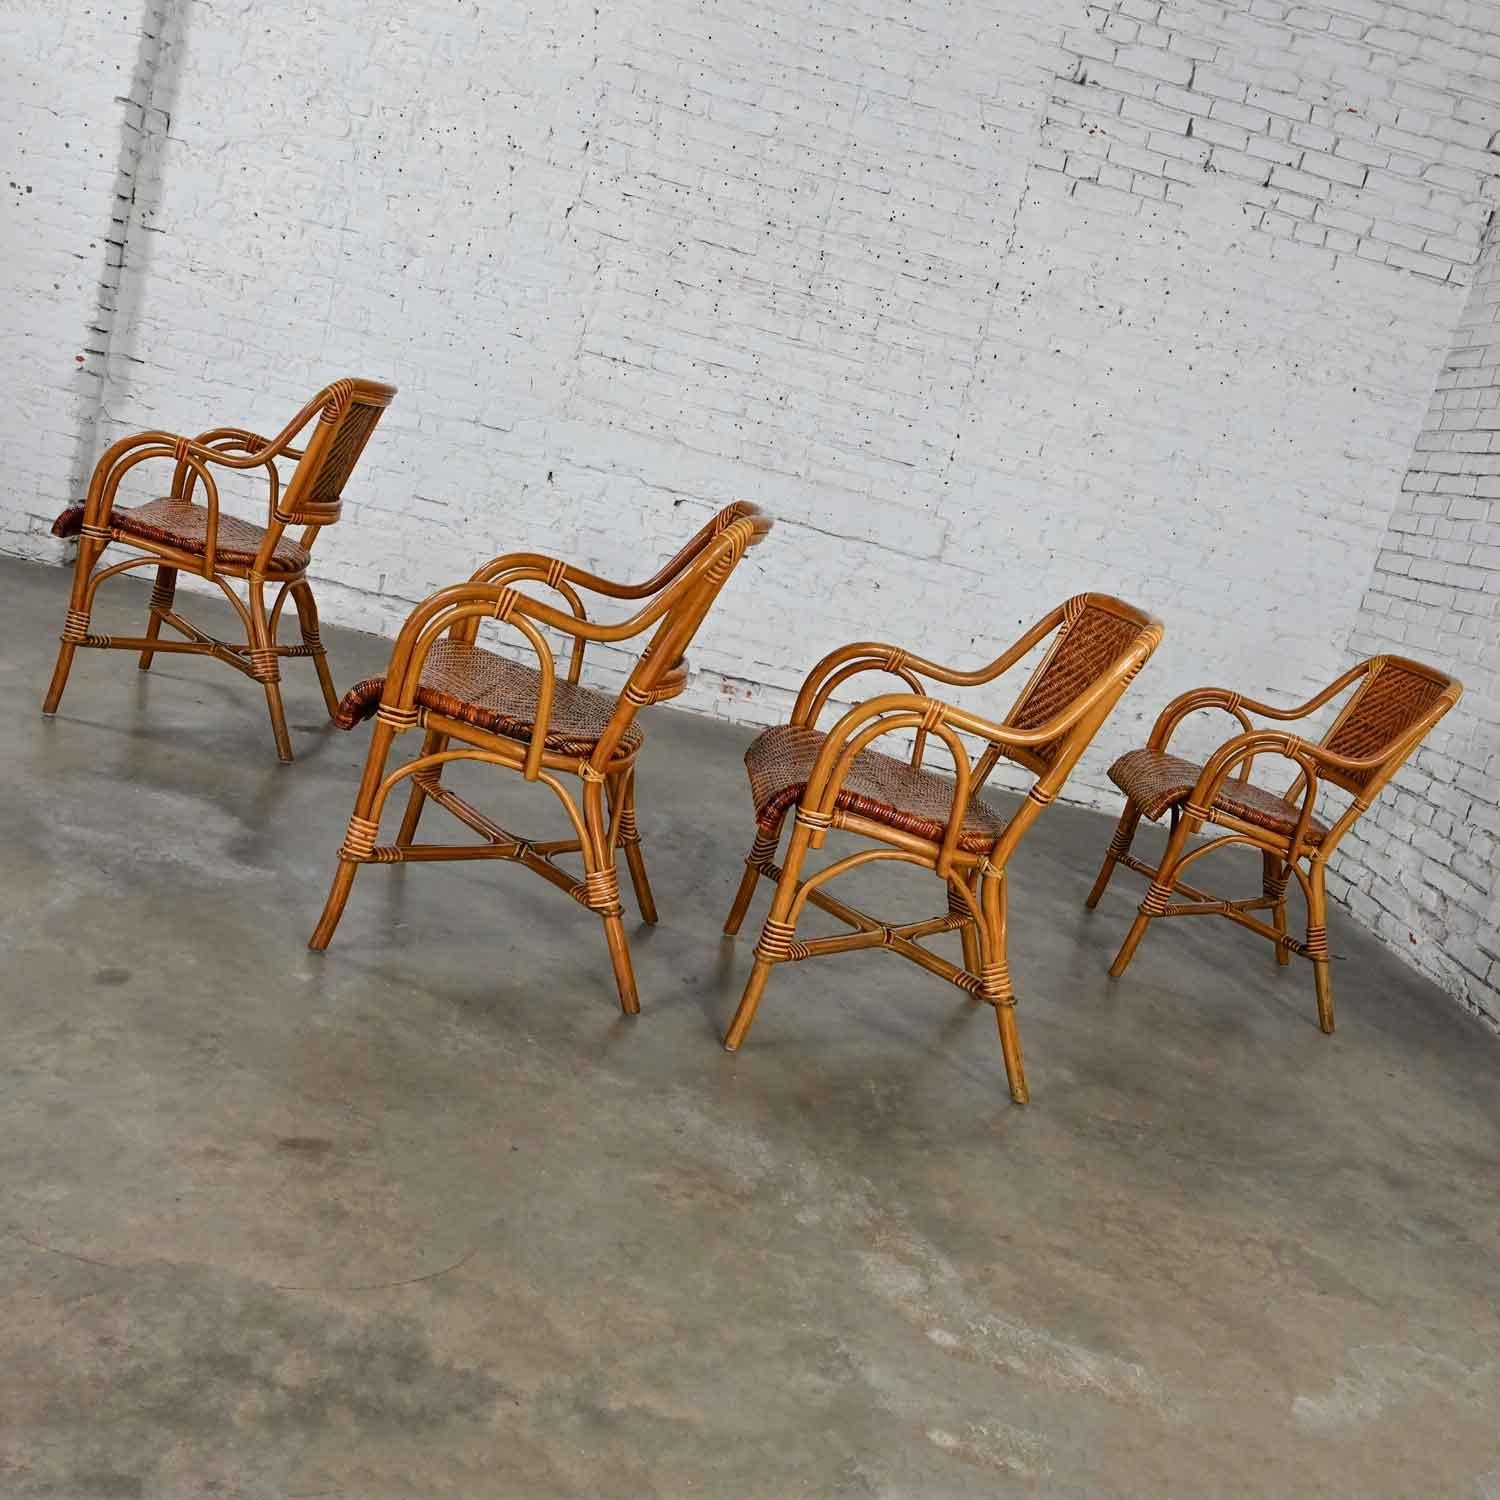 Boho Chic 2 Toned Wicker Rattan Café Bistro or Conservatory Armchairs Set of 4 2